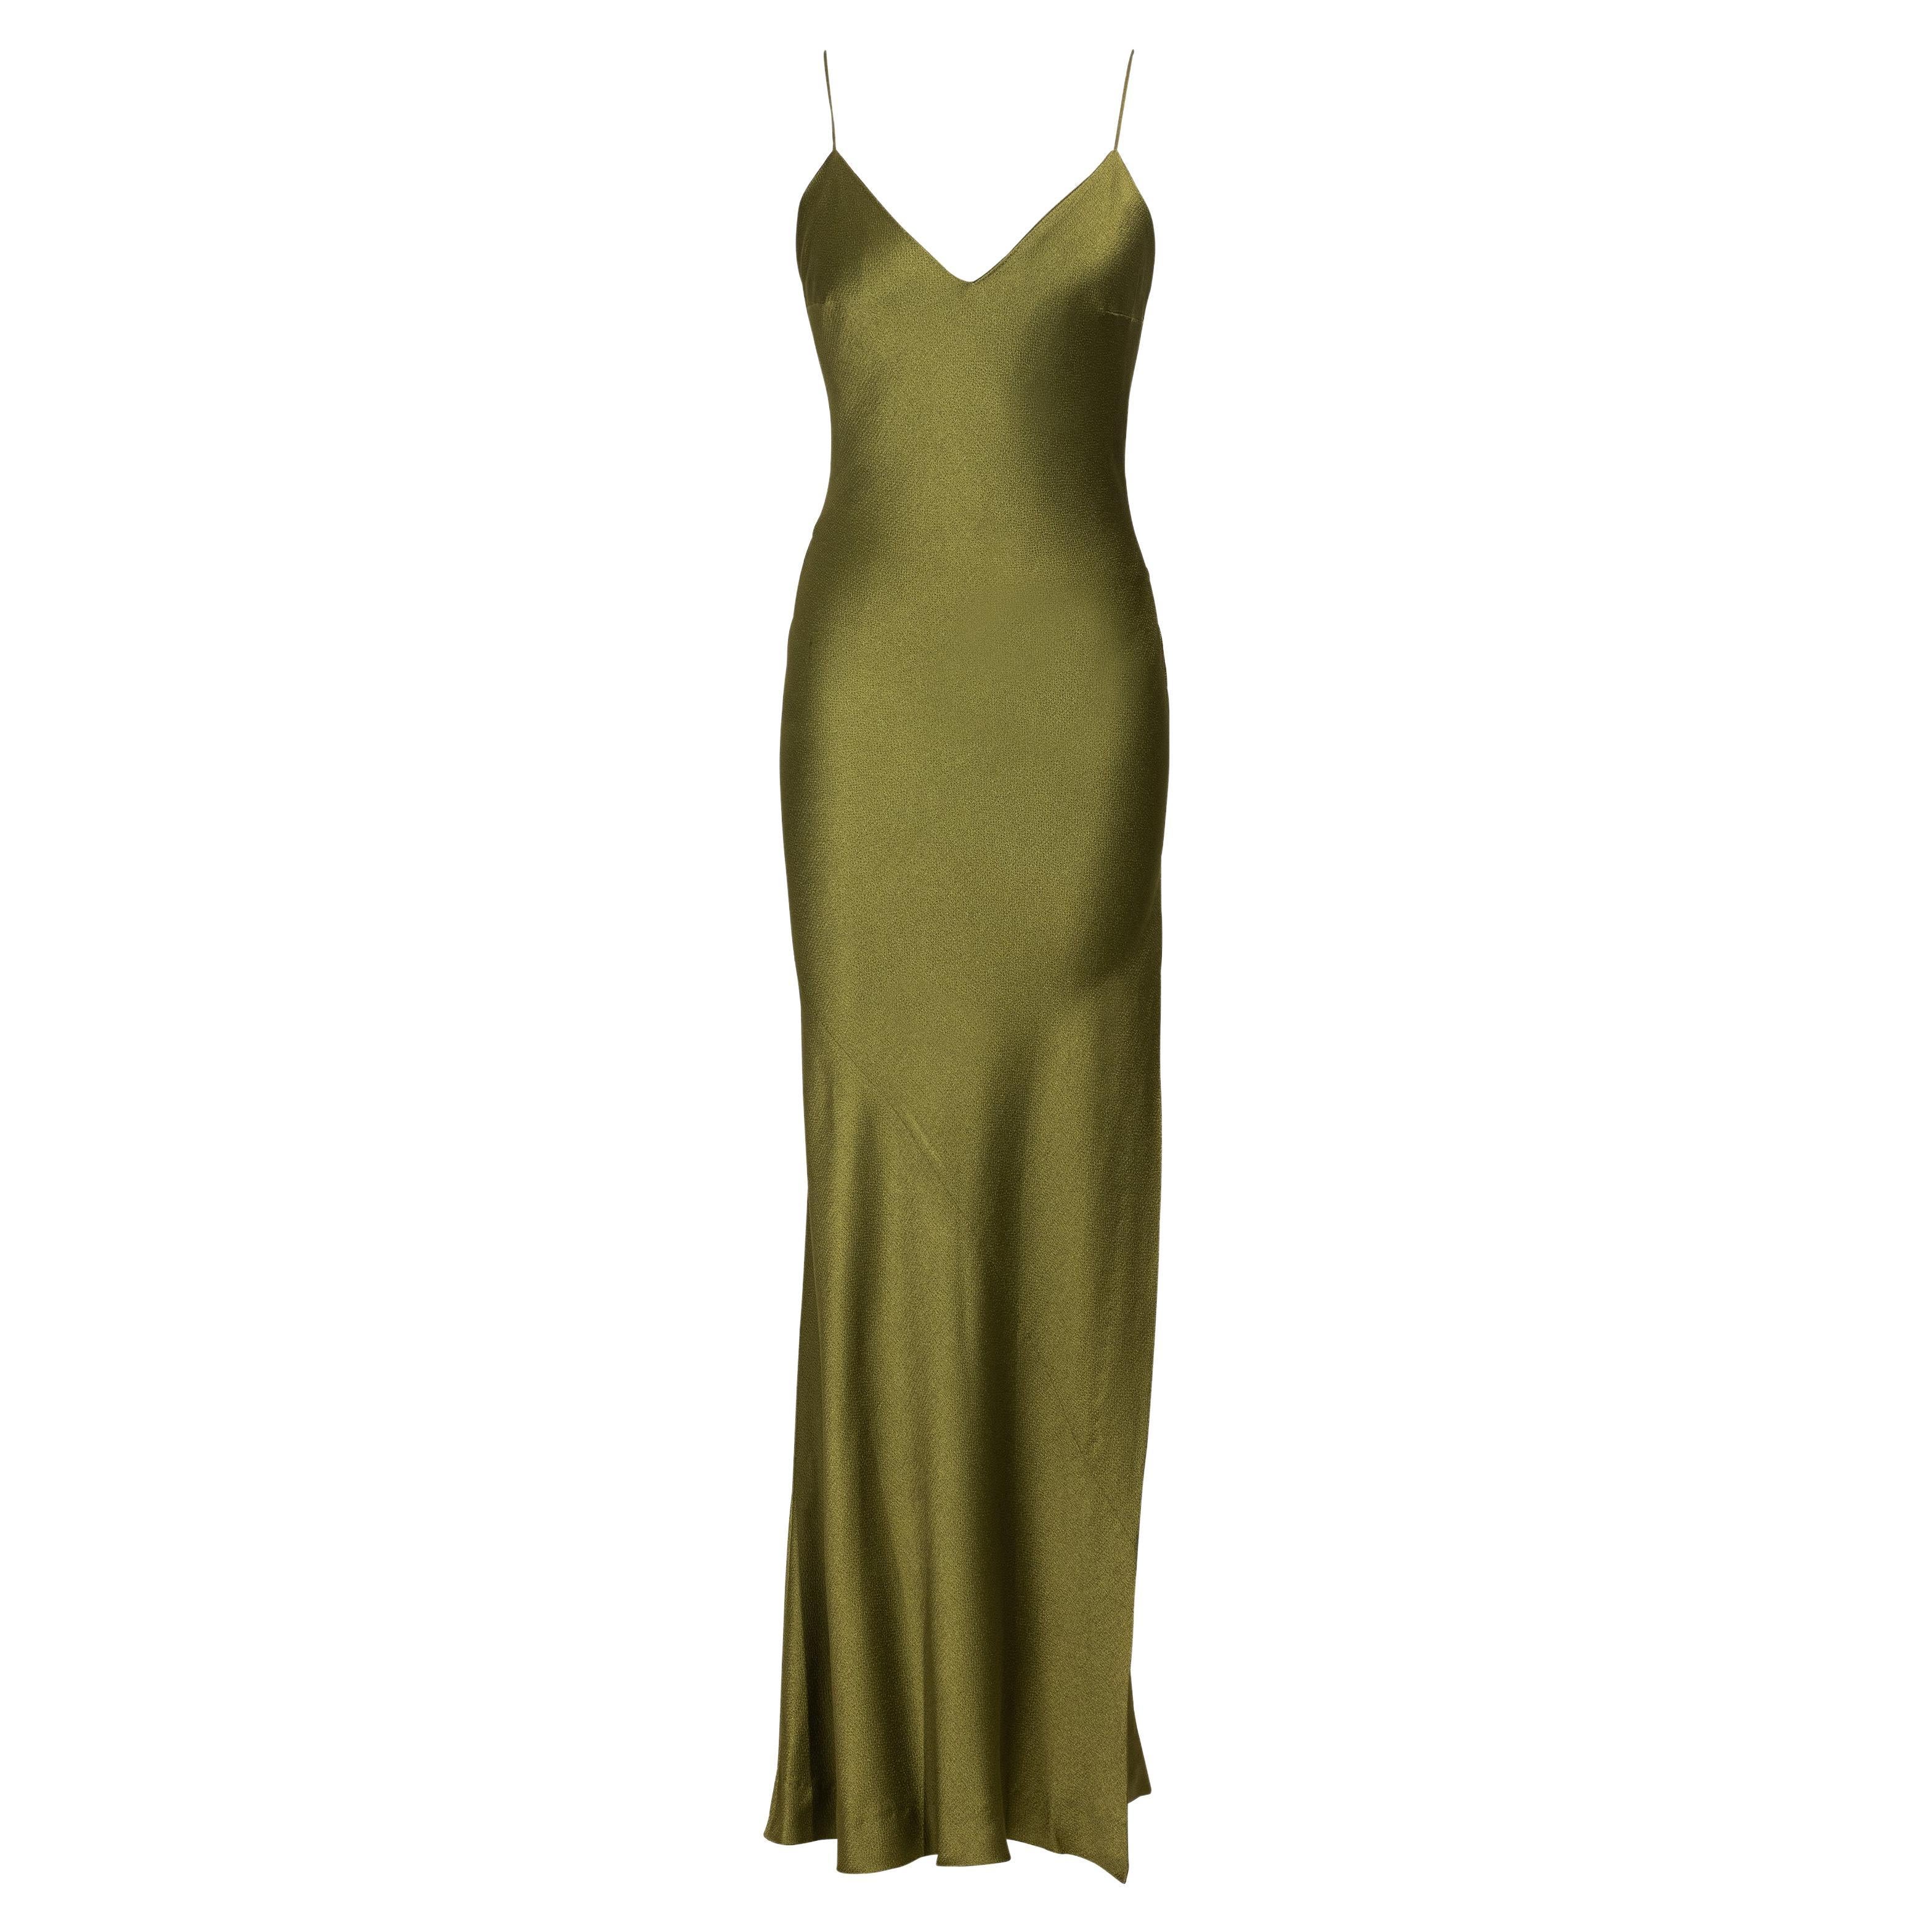 S/S 1999 Christian Dior by John Galliano Olive Green Bias Cut Slip Gown